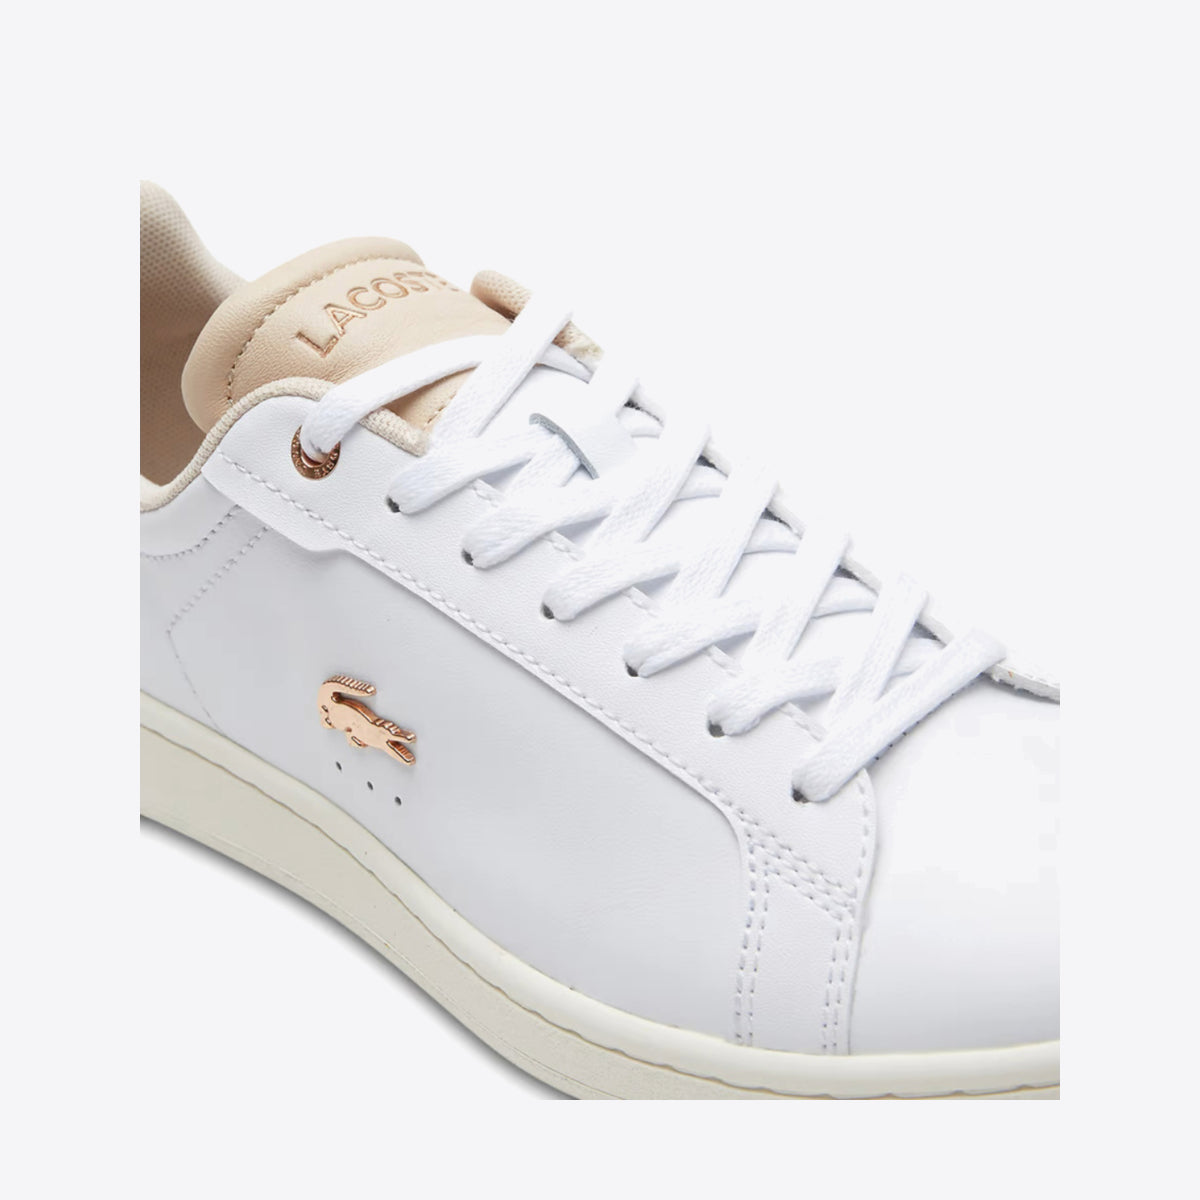 LACOSTE Carnaby Pro White/Off White - Image 5